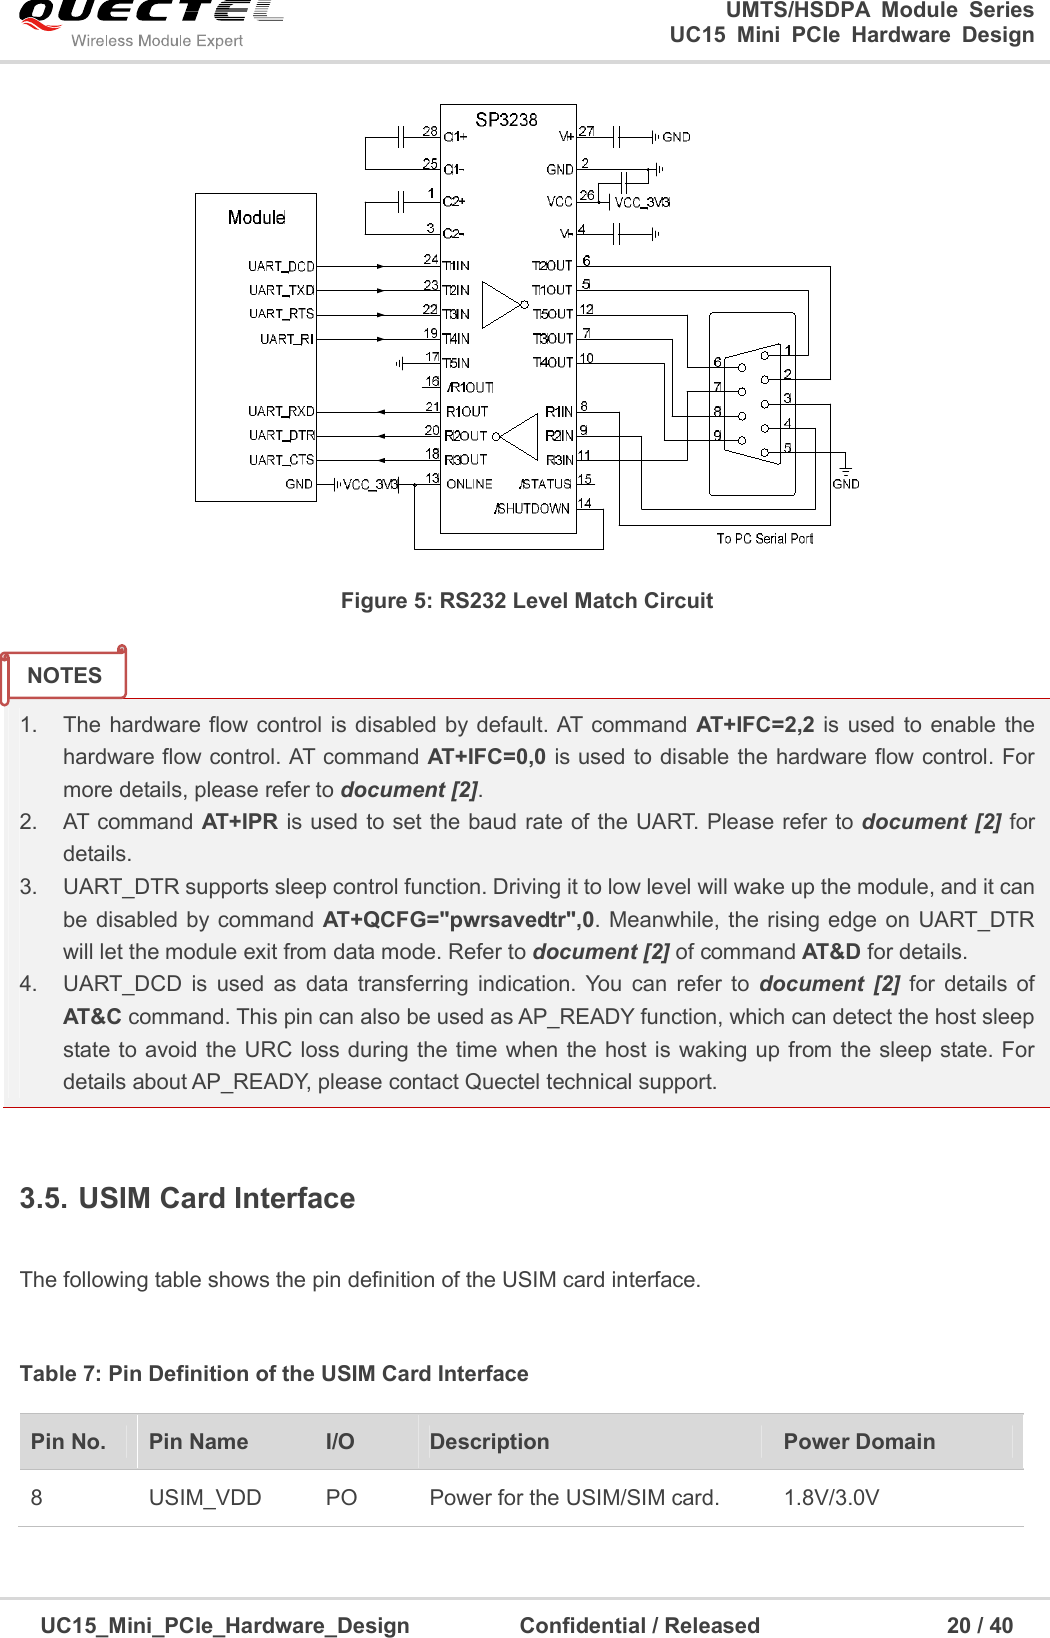                                                                        UMTS/HSDPA  Module  Series                                                          UC15 Mini PCIe Hardware Design  UC15_Mini_PCIe_Hardware_Design                    Confidential / Released                                  20 / 40     Figure 5: RS232 Level Match Circuit    1.  The hardware flow  control is disabled by  default. AT command AT+IFC=2,2 is used to enable the hardware flow control. AT command AT+IFC=0,0 is used to disable the hardware flow control. For more details, please refer to document [2]. 2.  AT command AT+IPR is used to set the baud rate of the UART. Please refer to document [2] for details. 3.  UART_DTR supports sleep control function. Driving it to low level will wake up the module, and it can be disabled by  command AT+QCFG=&quot;pwrsavedtr&quot;,0. Meanwhile,  the rising edge  on UART_DTR will let the module exit from data mode. Refer to document [2] of command AT&amp;D for details.     4.  UART_DCD  is  used  as  data  transferring  indication.  You  can  refer  to  document  [2]  for  details  of AT&amp;C command. This pin can also be used as AP_READY function, which can detect the host sleep state to avoid the URC loss during the time  when the host is waking up from the sleep state. For details about AP_READY, please contact Quectel technical support.  3.5. USIM Card Interface  The following table shows the pin definition of the USIM card interface.  Table 7: Pin Definition of the USIM Card Interface Pin No.  Pin Name I/O  Description Power Domain                       8 USIM_VDD PO                       Power for the USIM/SIM card.  1.8V/3.0V                        NOTES 